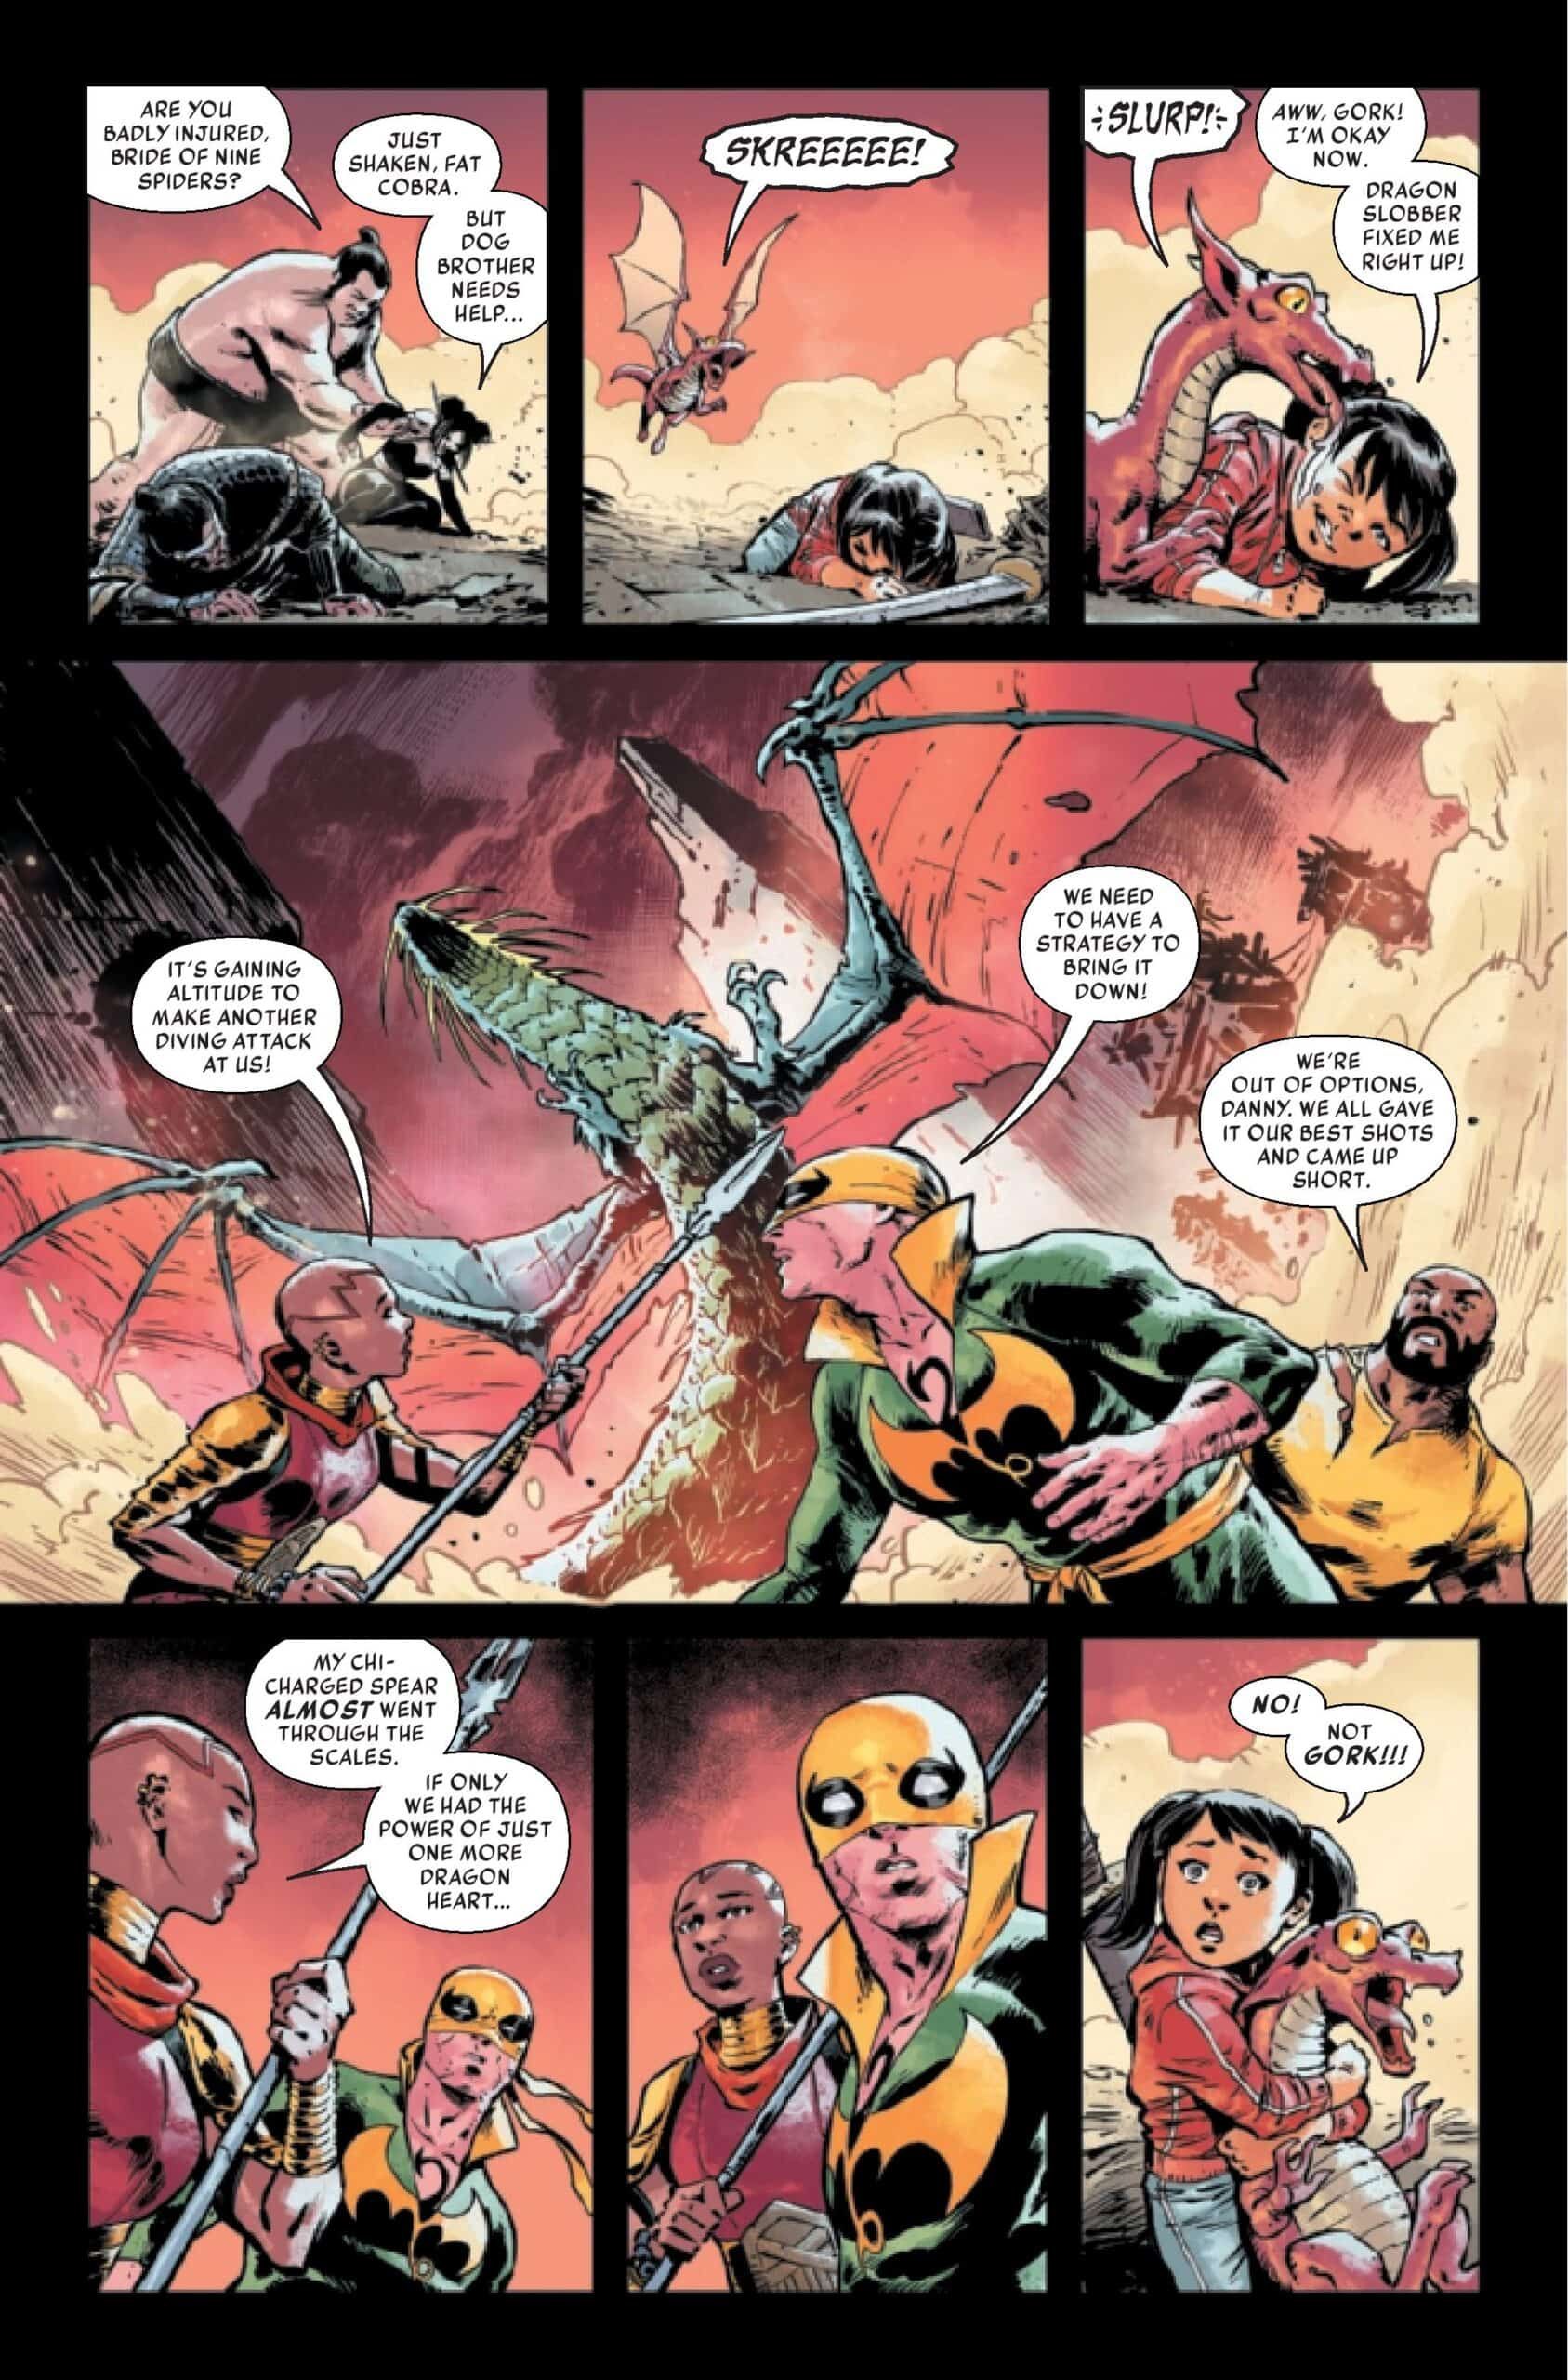 Iron Fist: Heart of the Dragon #6 Preview Page 5